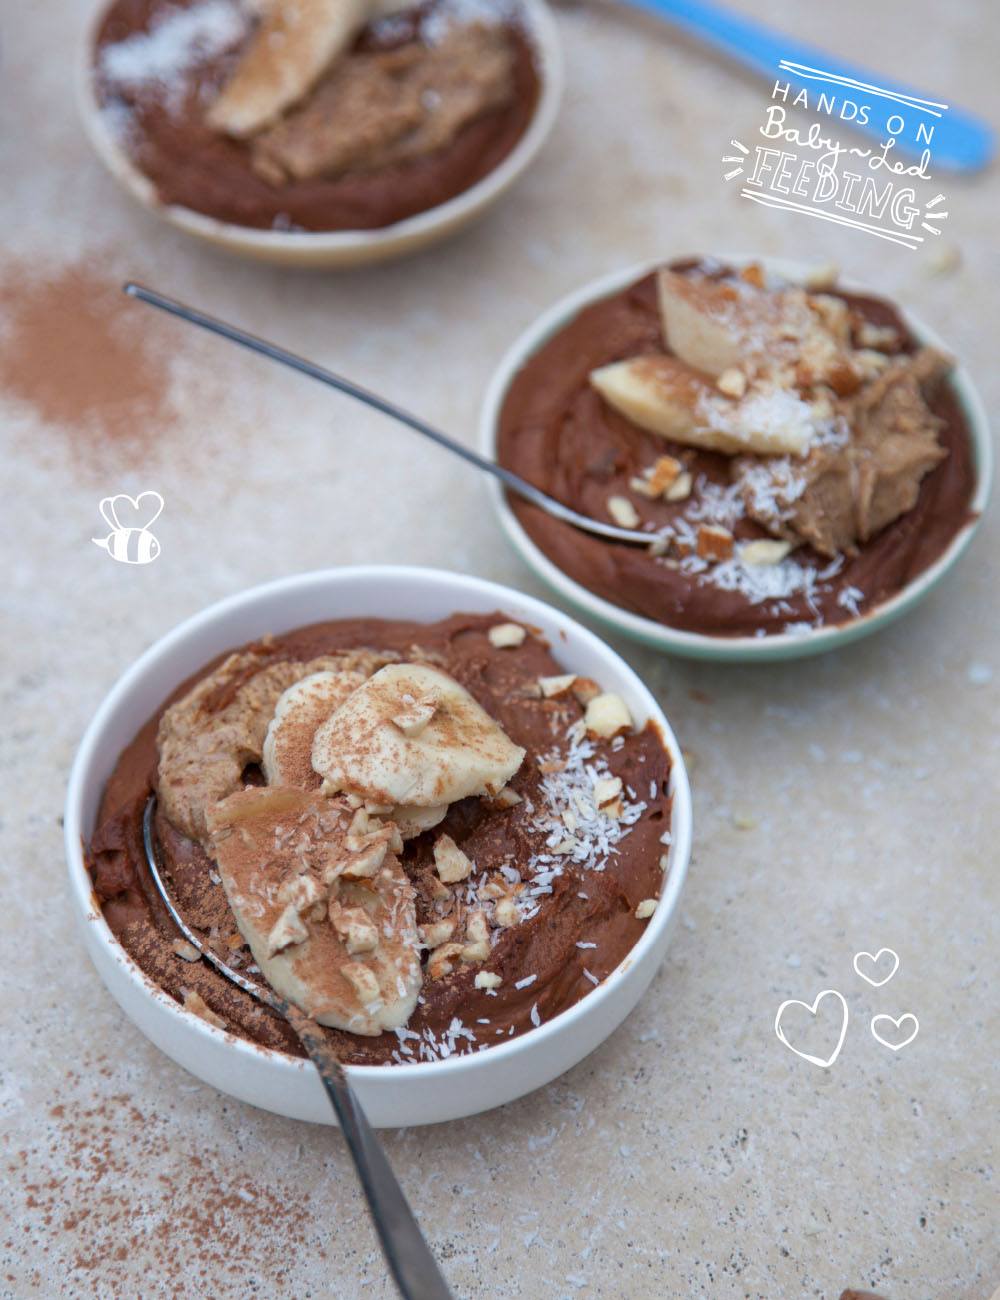 A really healthy chocolate mousse made using sweet potato and banana 3 bowls of chocolate photography and chocolate food styling Ireland. This really delicious blw recipe for Baby Led Weaning is a yummy treat for kids and really healthy too. These can also be frozen to make teething pops for babies.